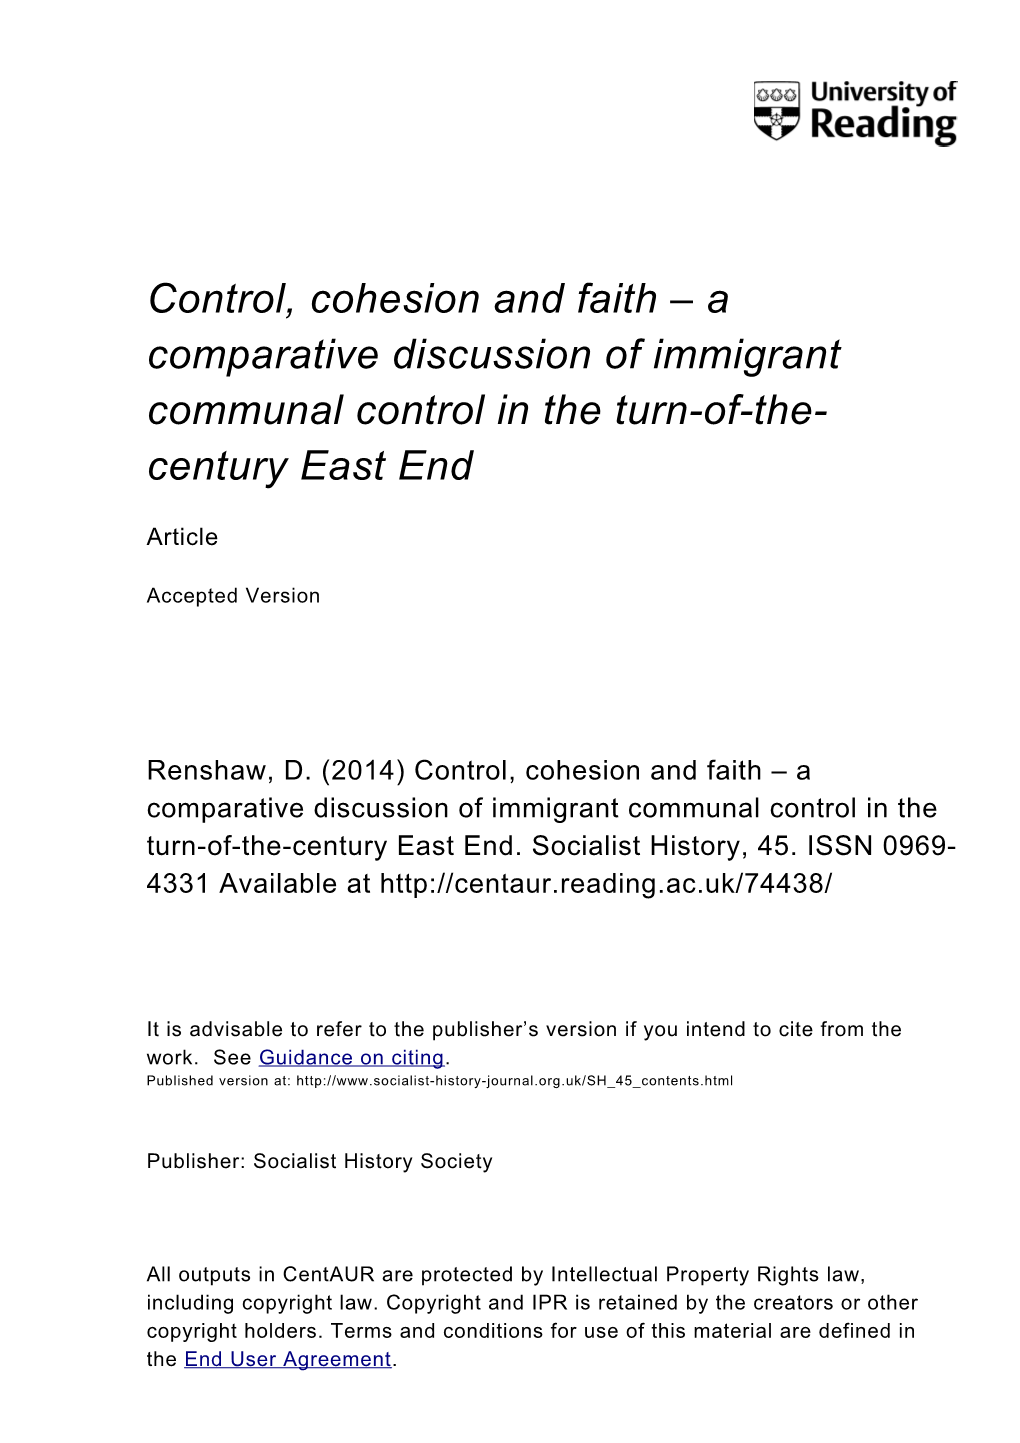 Control, Cohesion and Faith – a Comparative Discussion of Immigrant Communal Control in the Turn-Of-The- Century East End